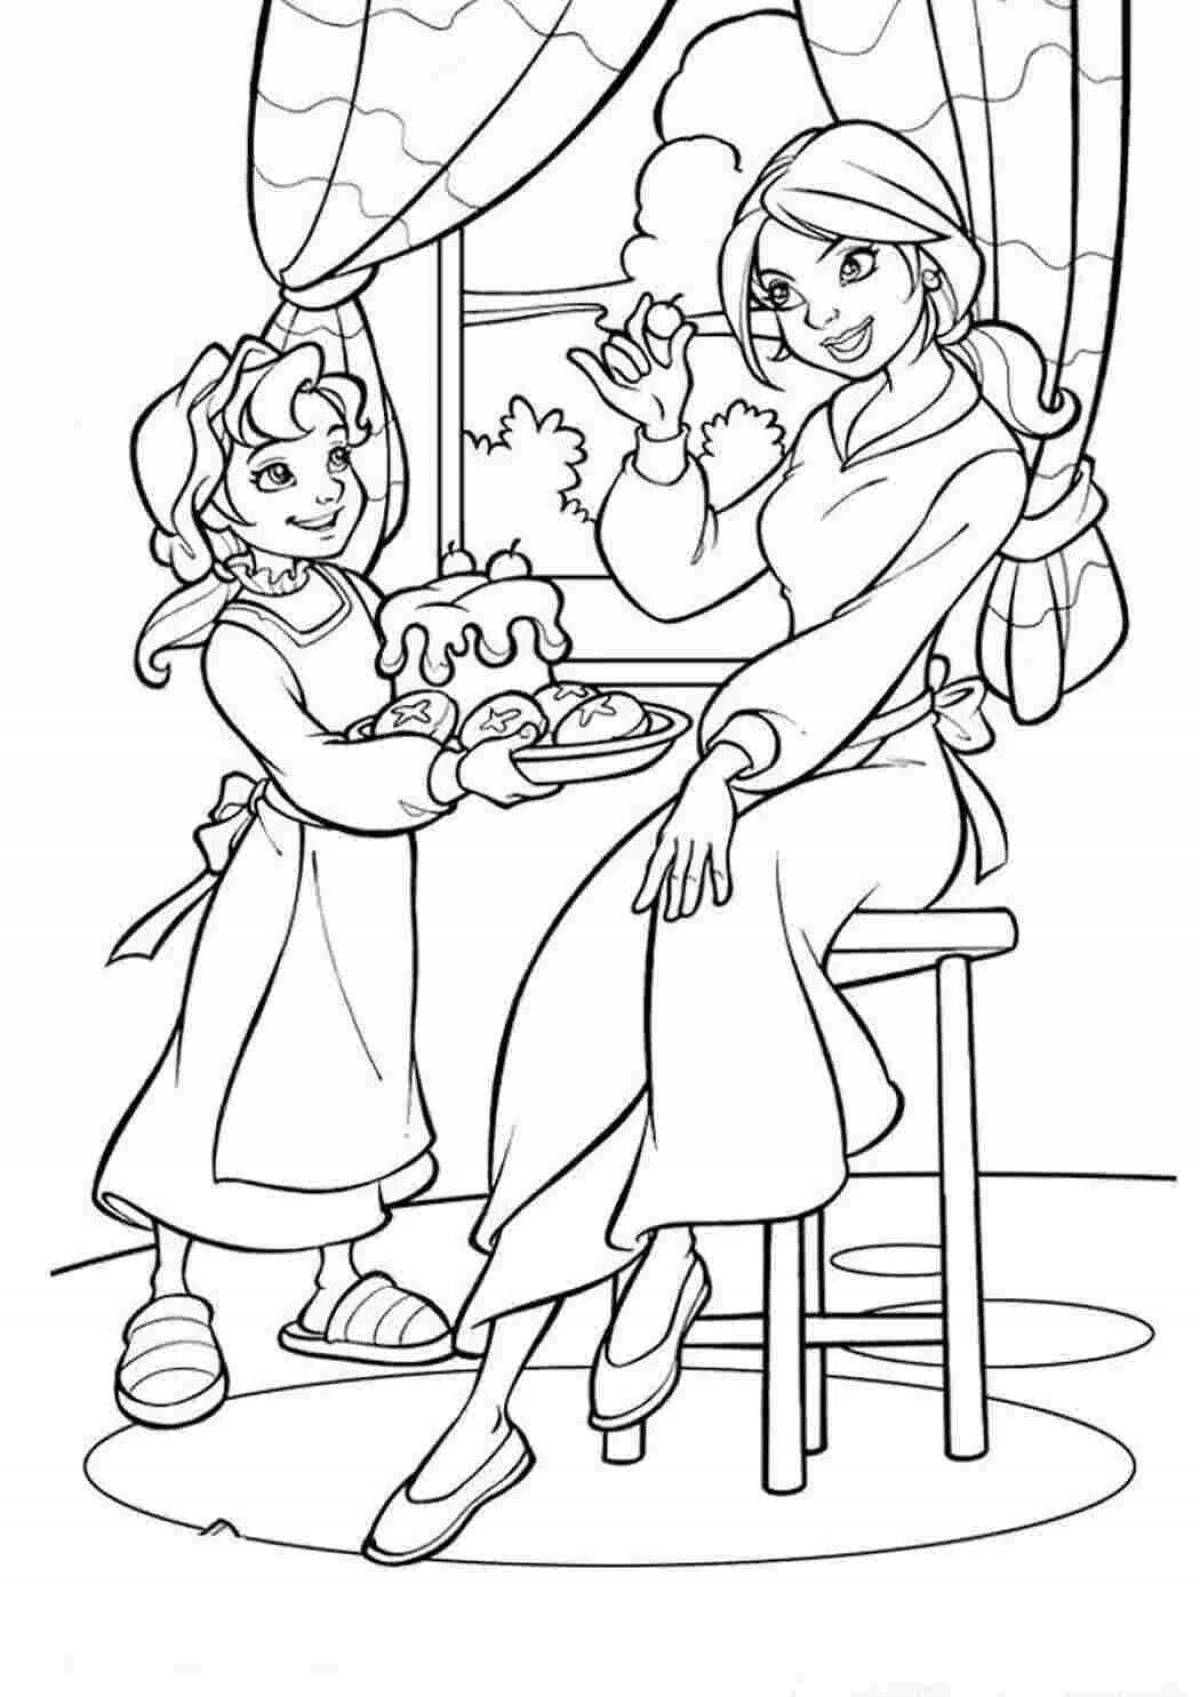 Live coloring mom and daughter